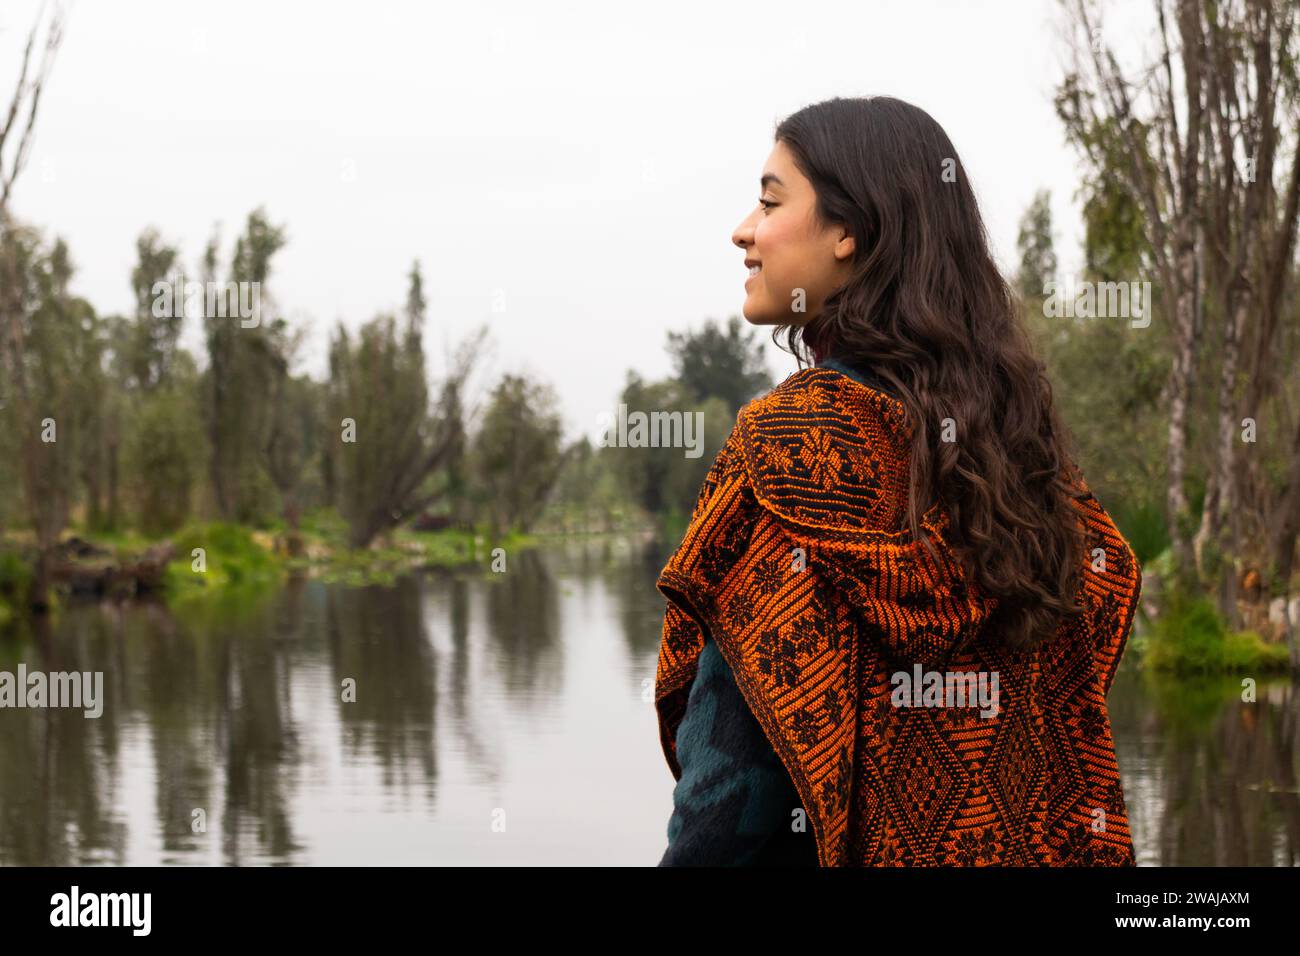 Side view of woman in a patterned shawl looks out over the peaceful waters of Xochimilcos canals Stock Photo